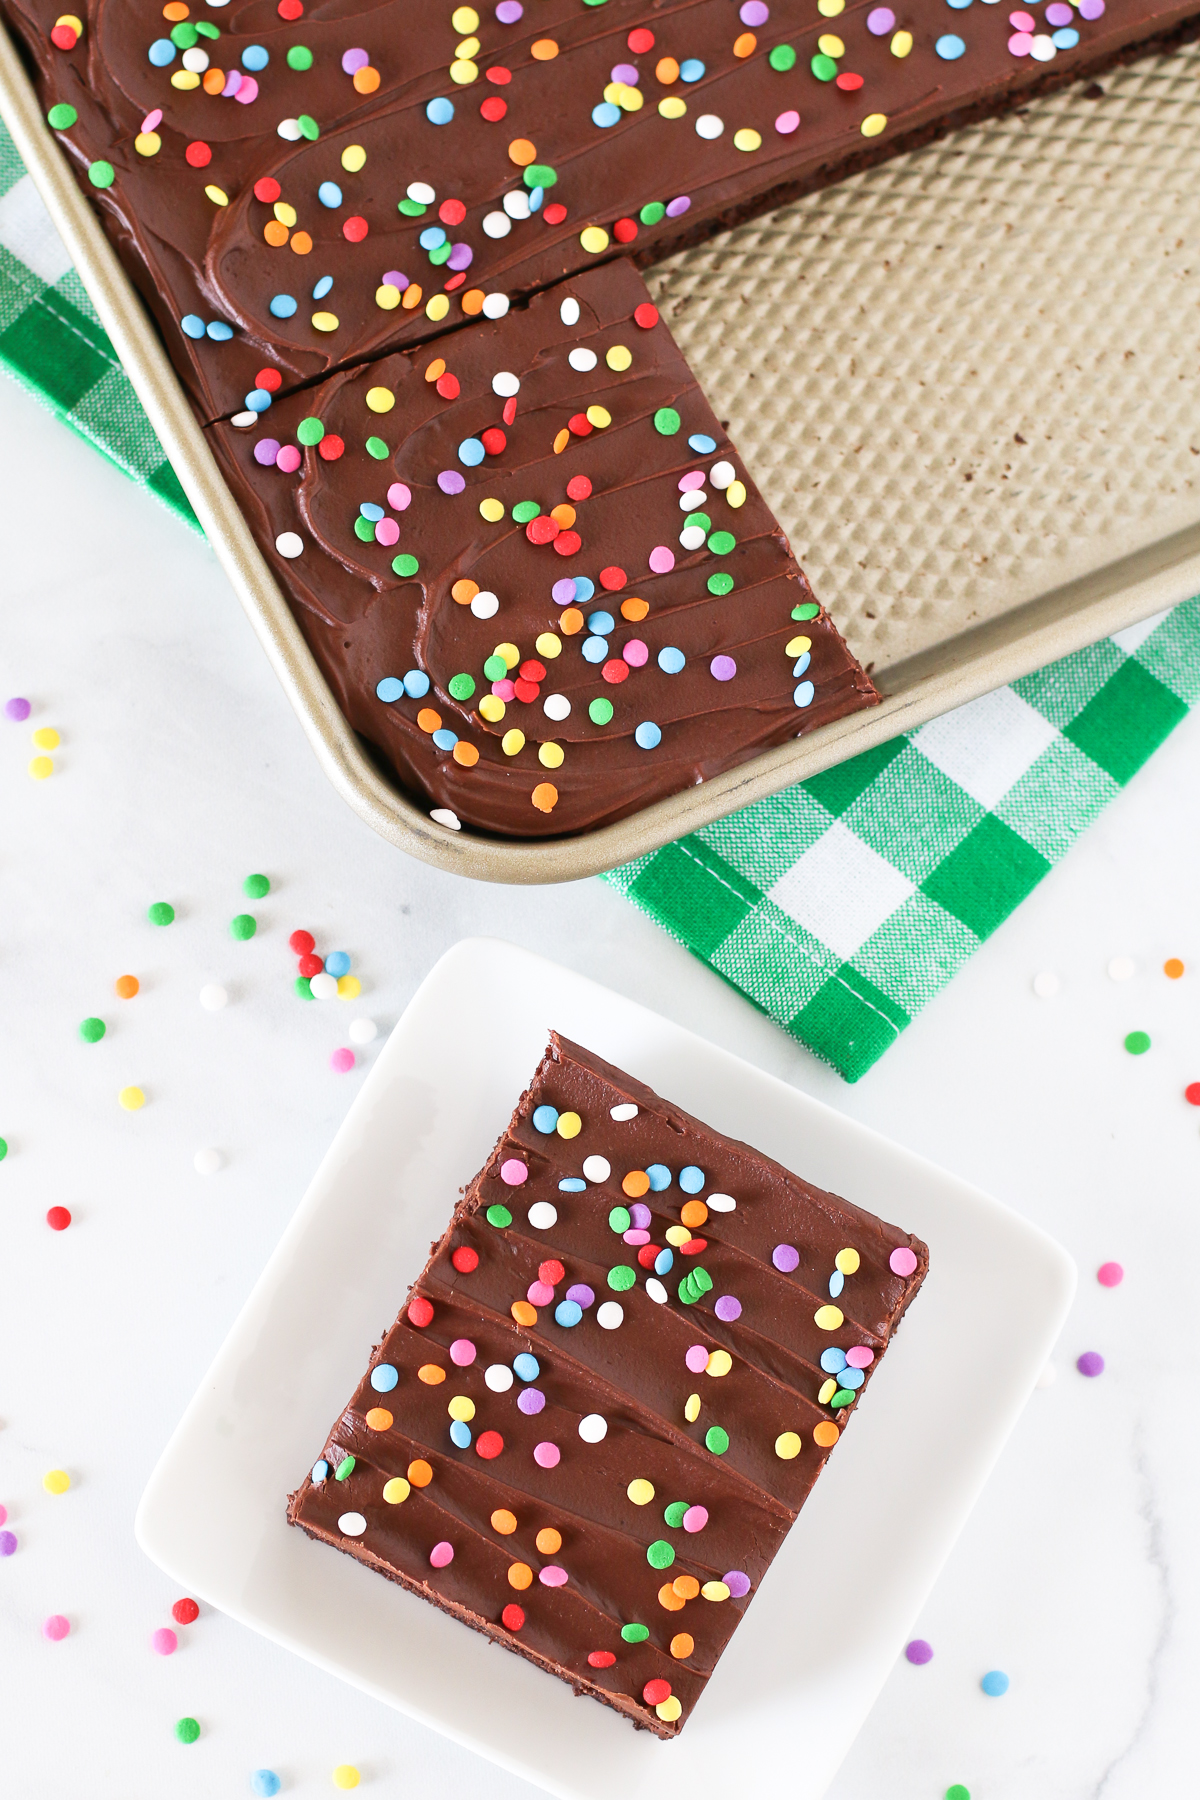 Gluten Free Vegan Chocolate Frosted Brownies. Fudgy, chocolate frosted brownie with colorful sprinkles. The perfect chocolate treat for any celebration!